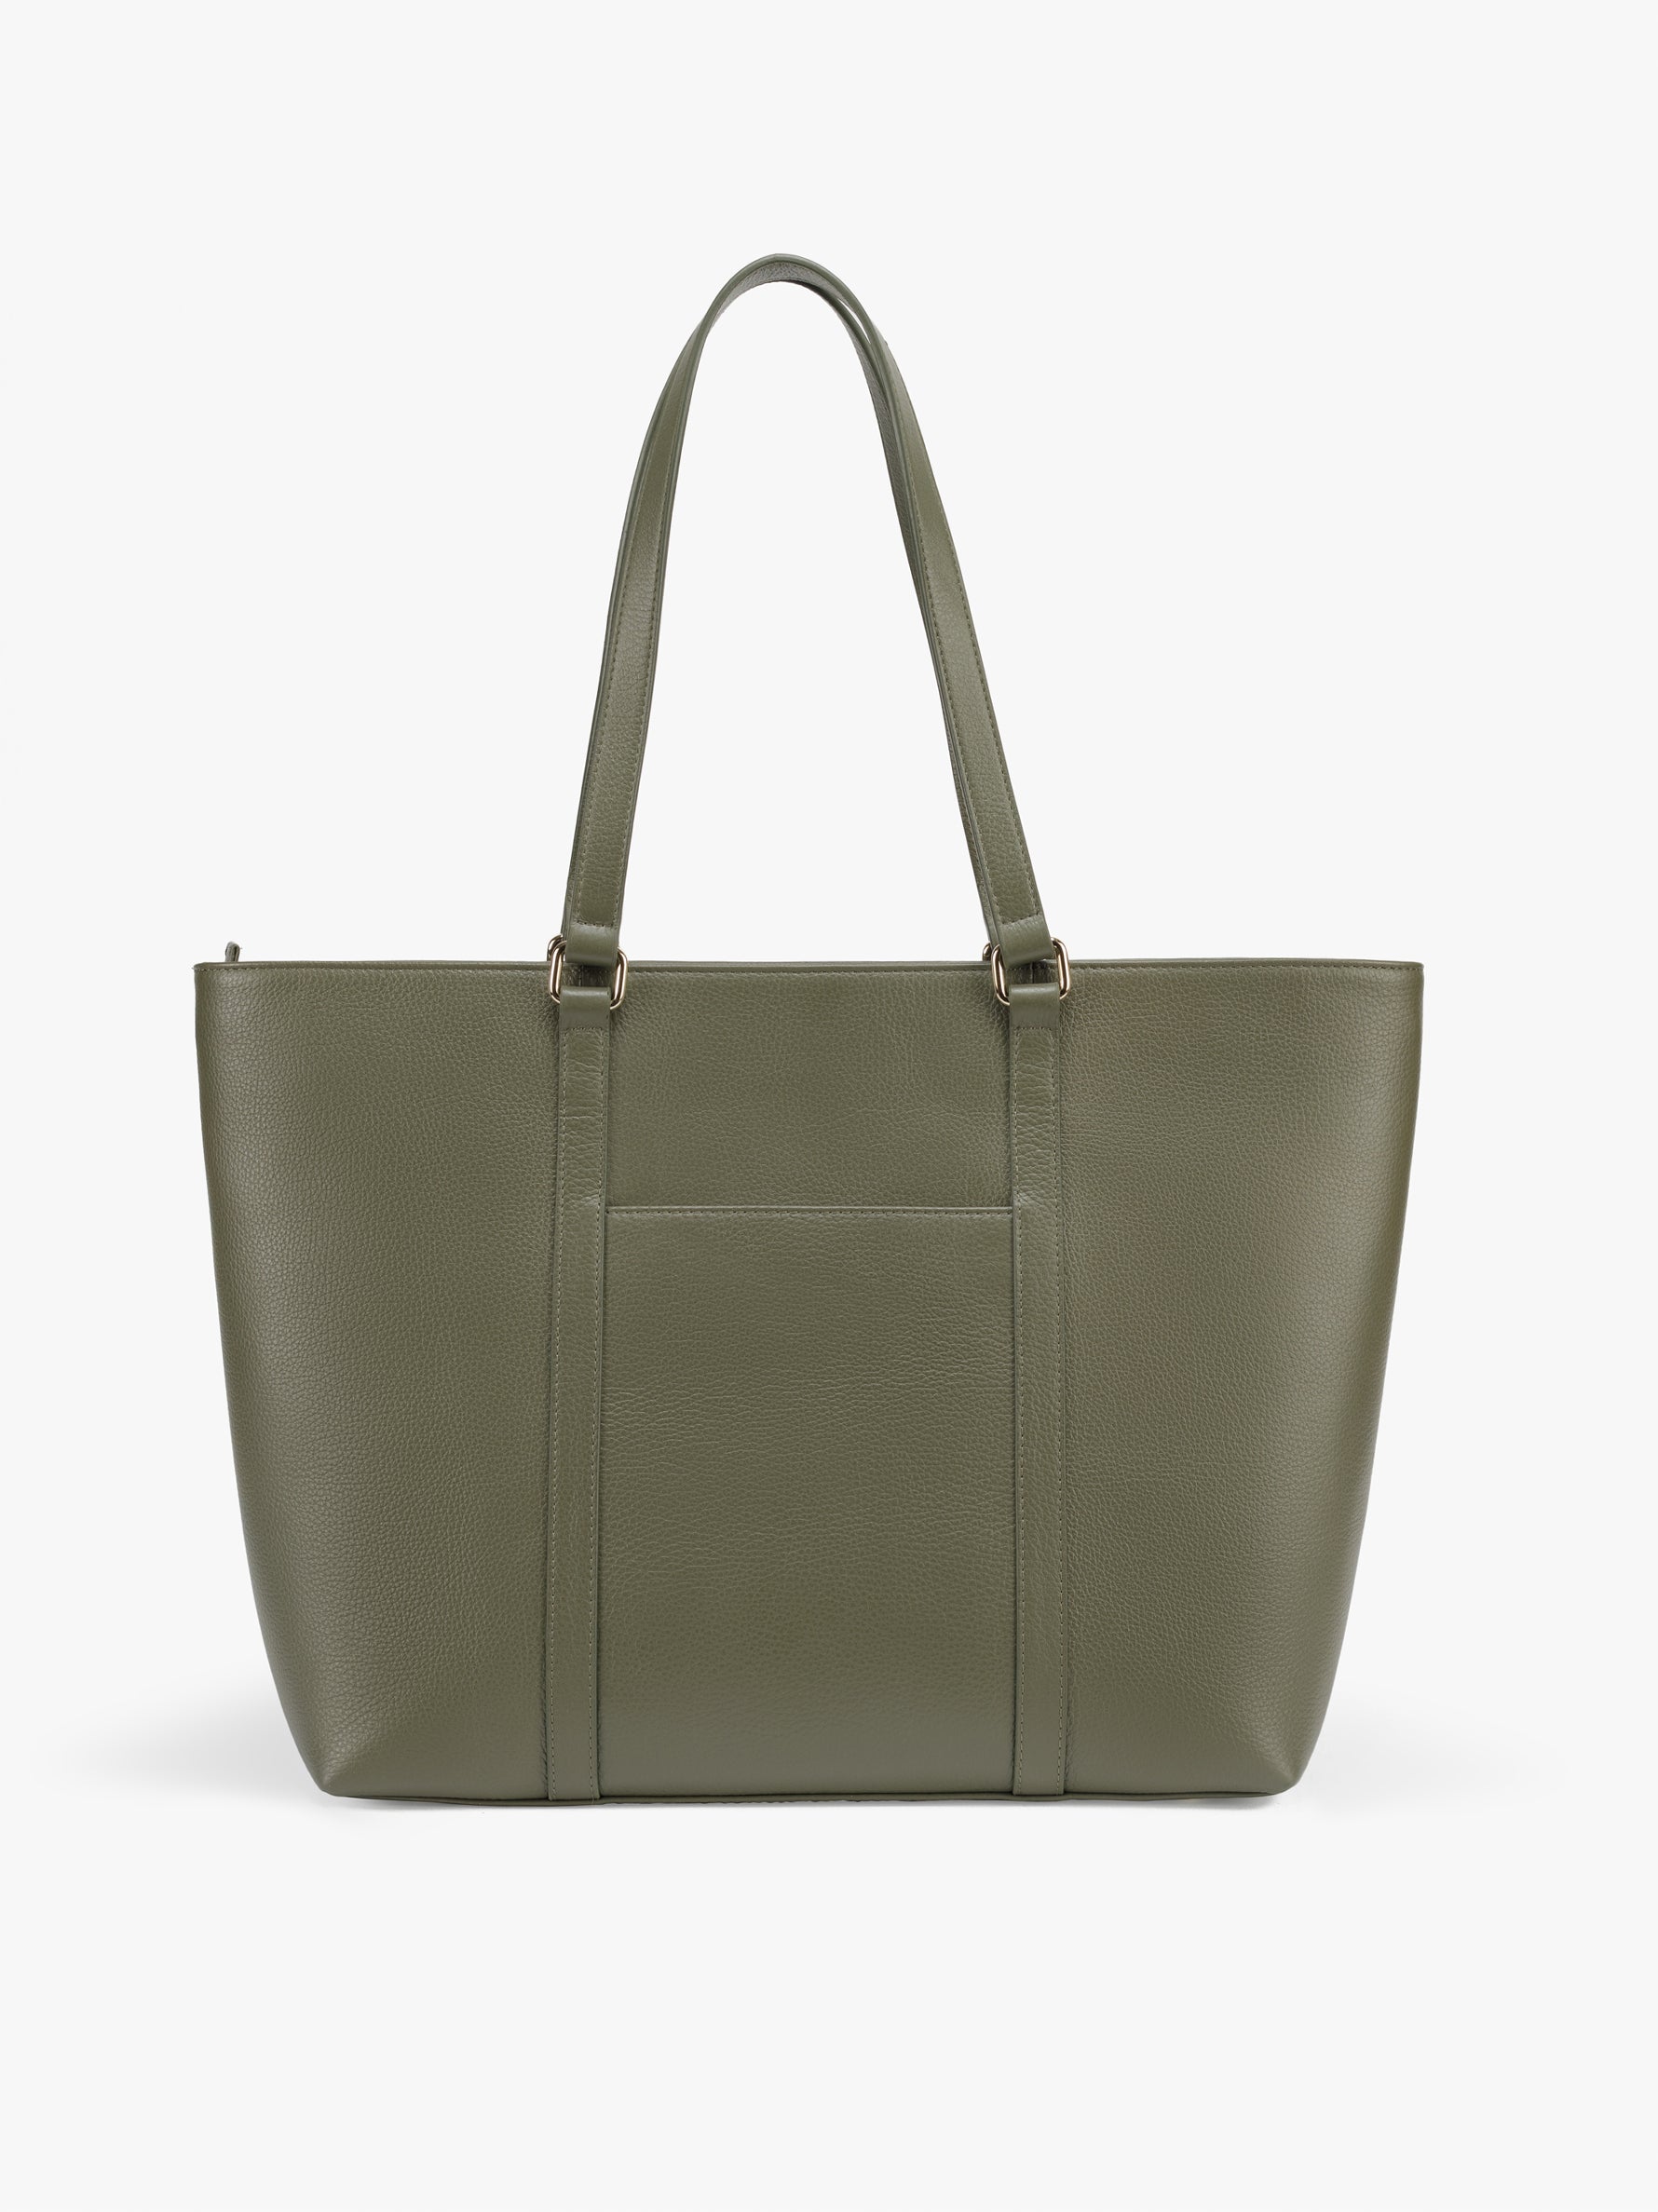 Handcrafted genuine leather office tote bag for women Olive Green